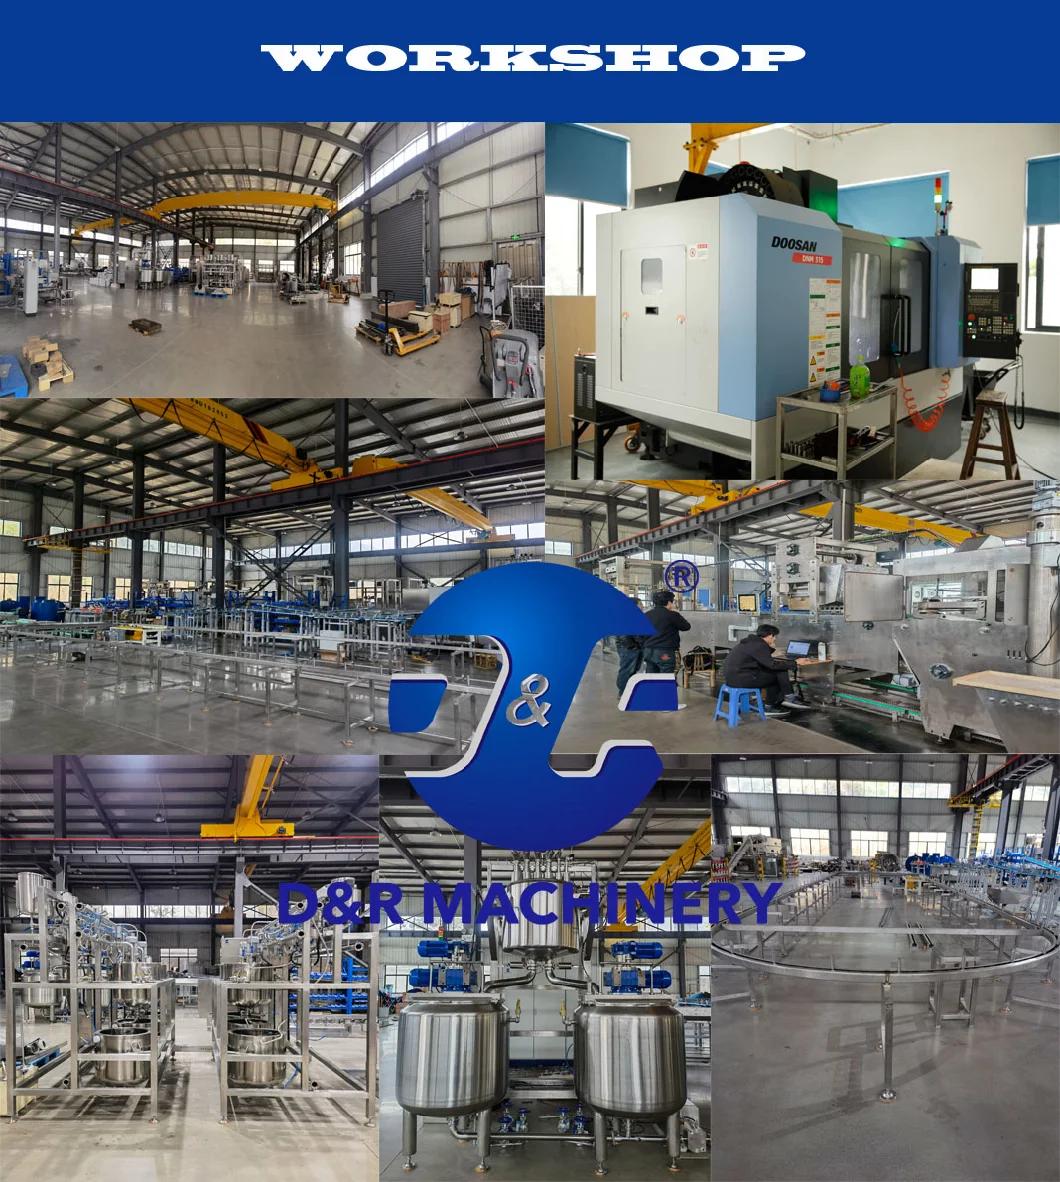 New Design Automatic Toffee Die-Forming Machine